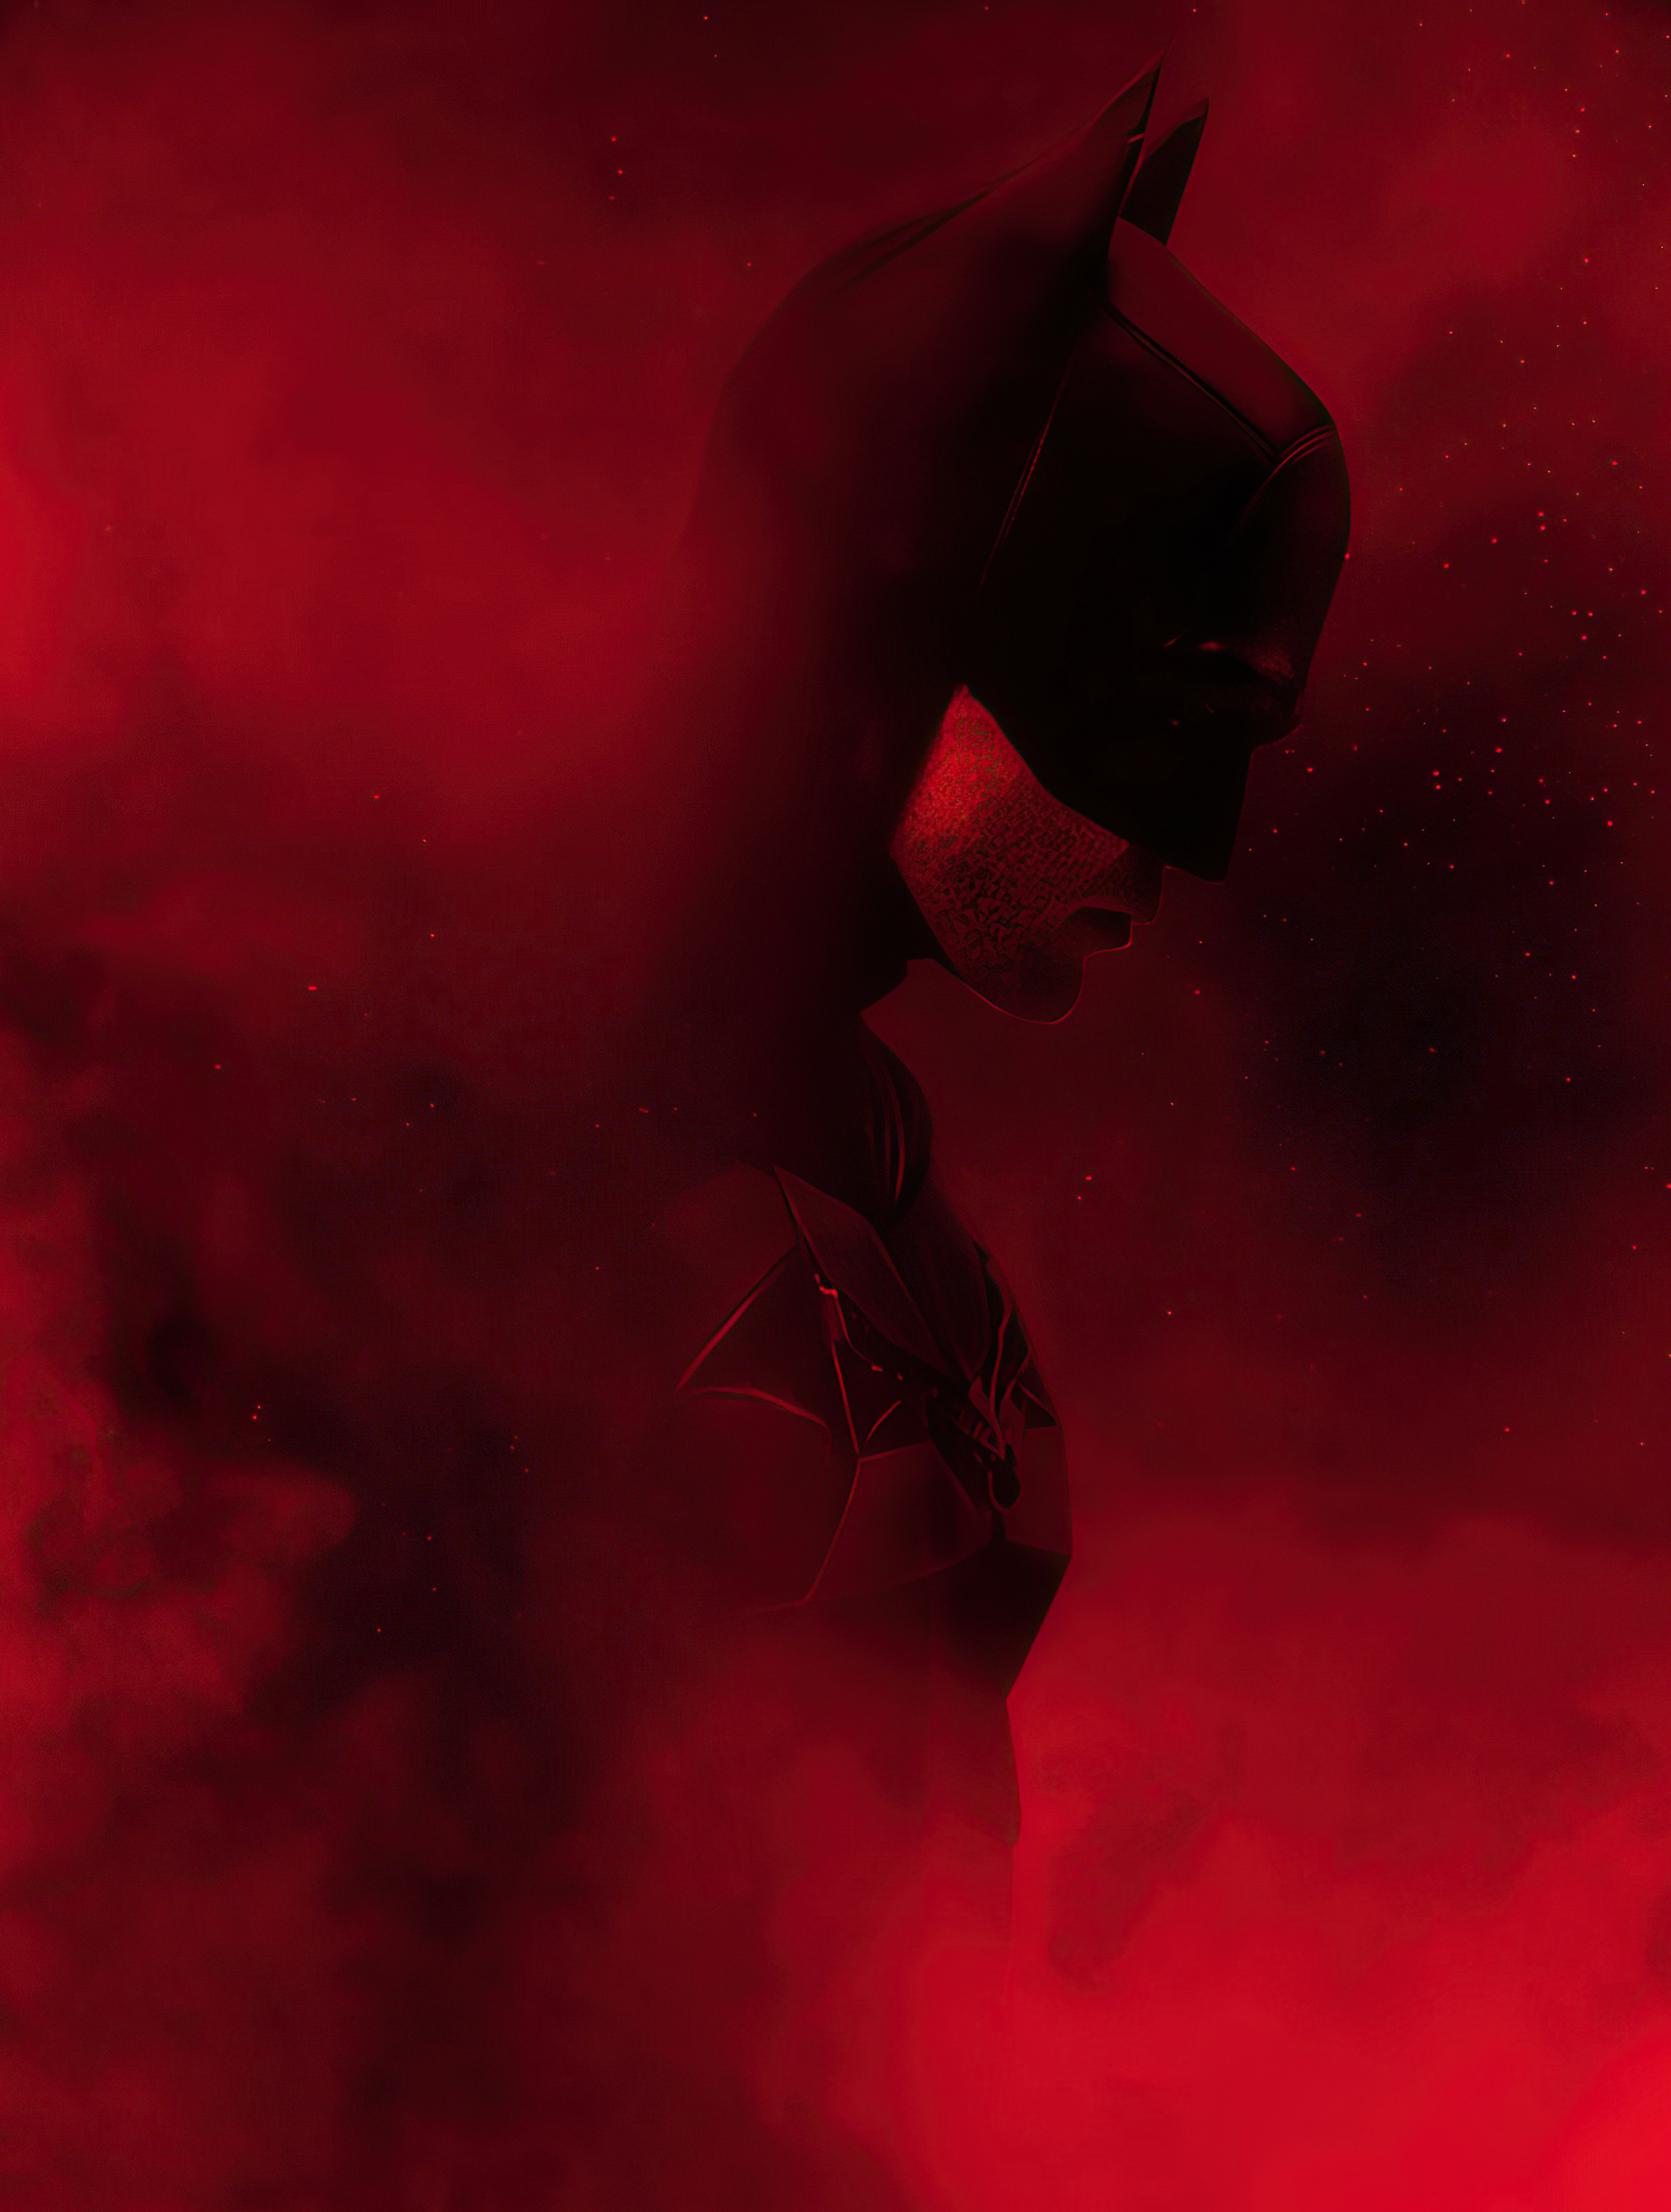 Batman And His Logo In White And Red Colour 4K wallpaper download